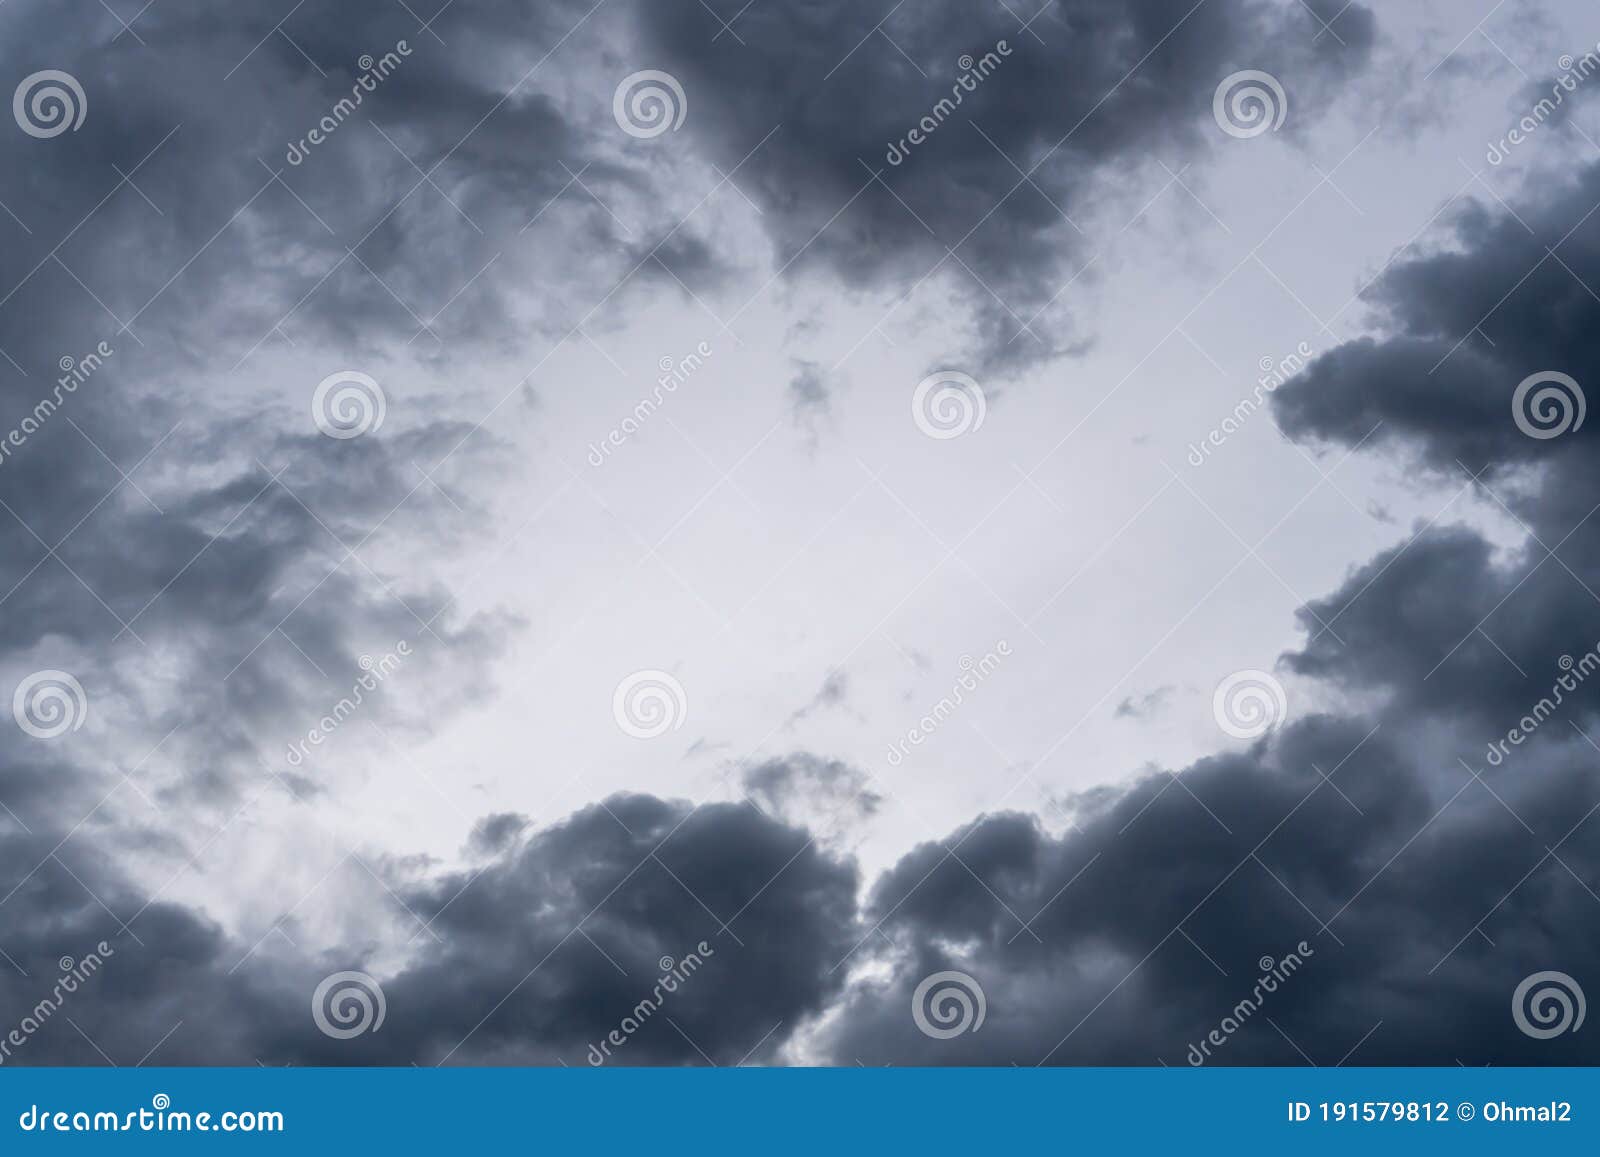 Gloomy Sky Background Scenery Of Dramatic Sky In Evening Looks Like Watercolor Painting Stock Photo Image Of High Season